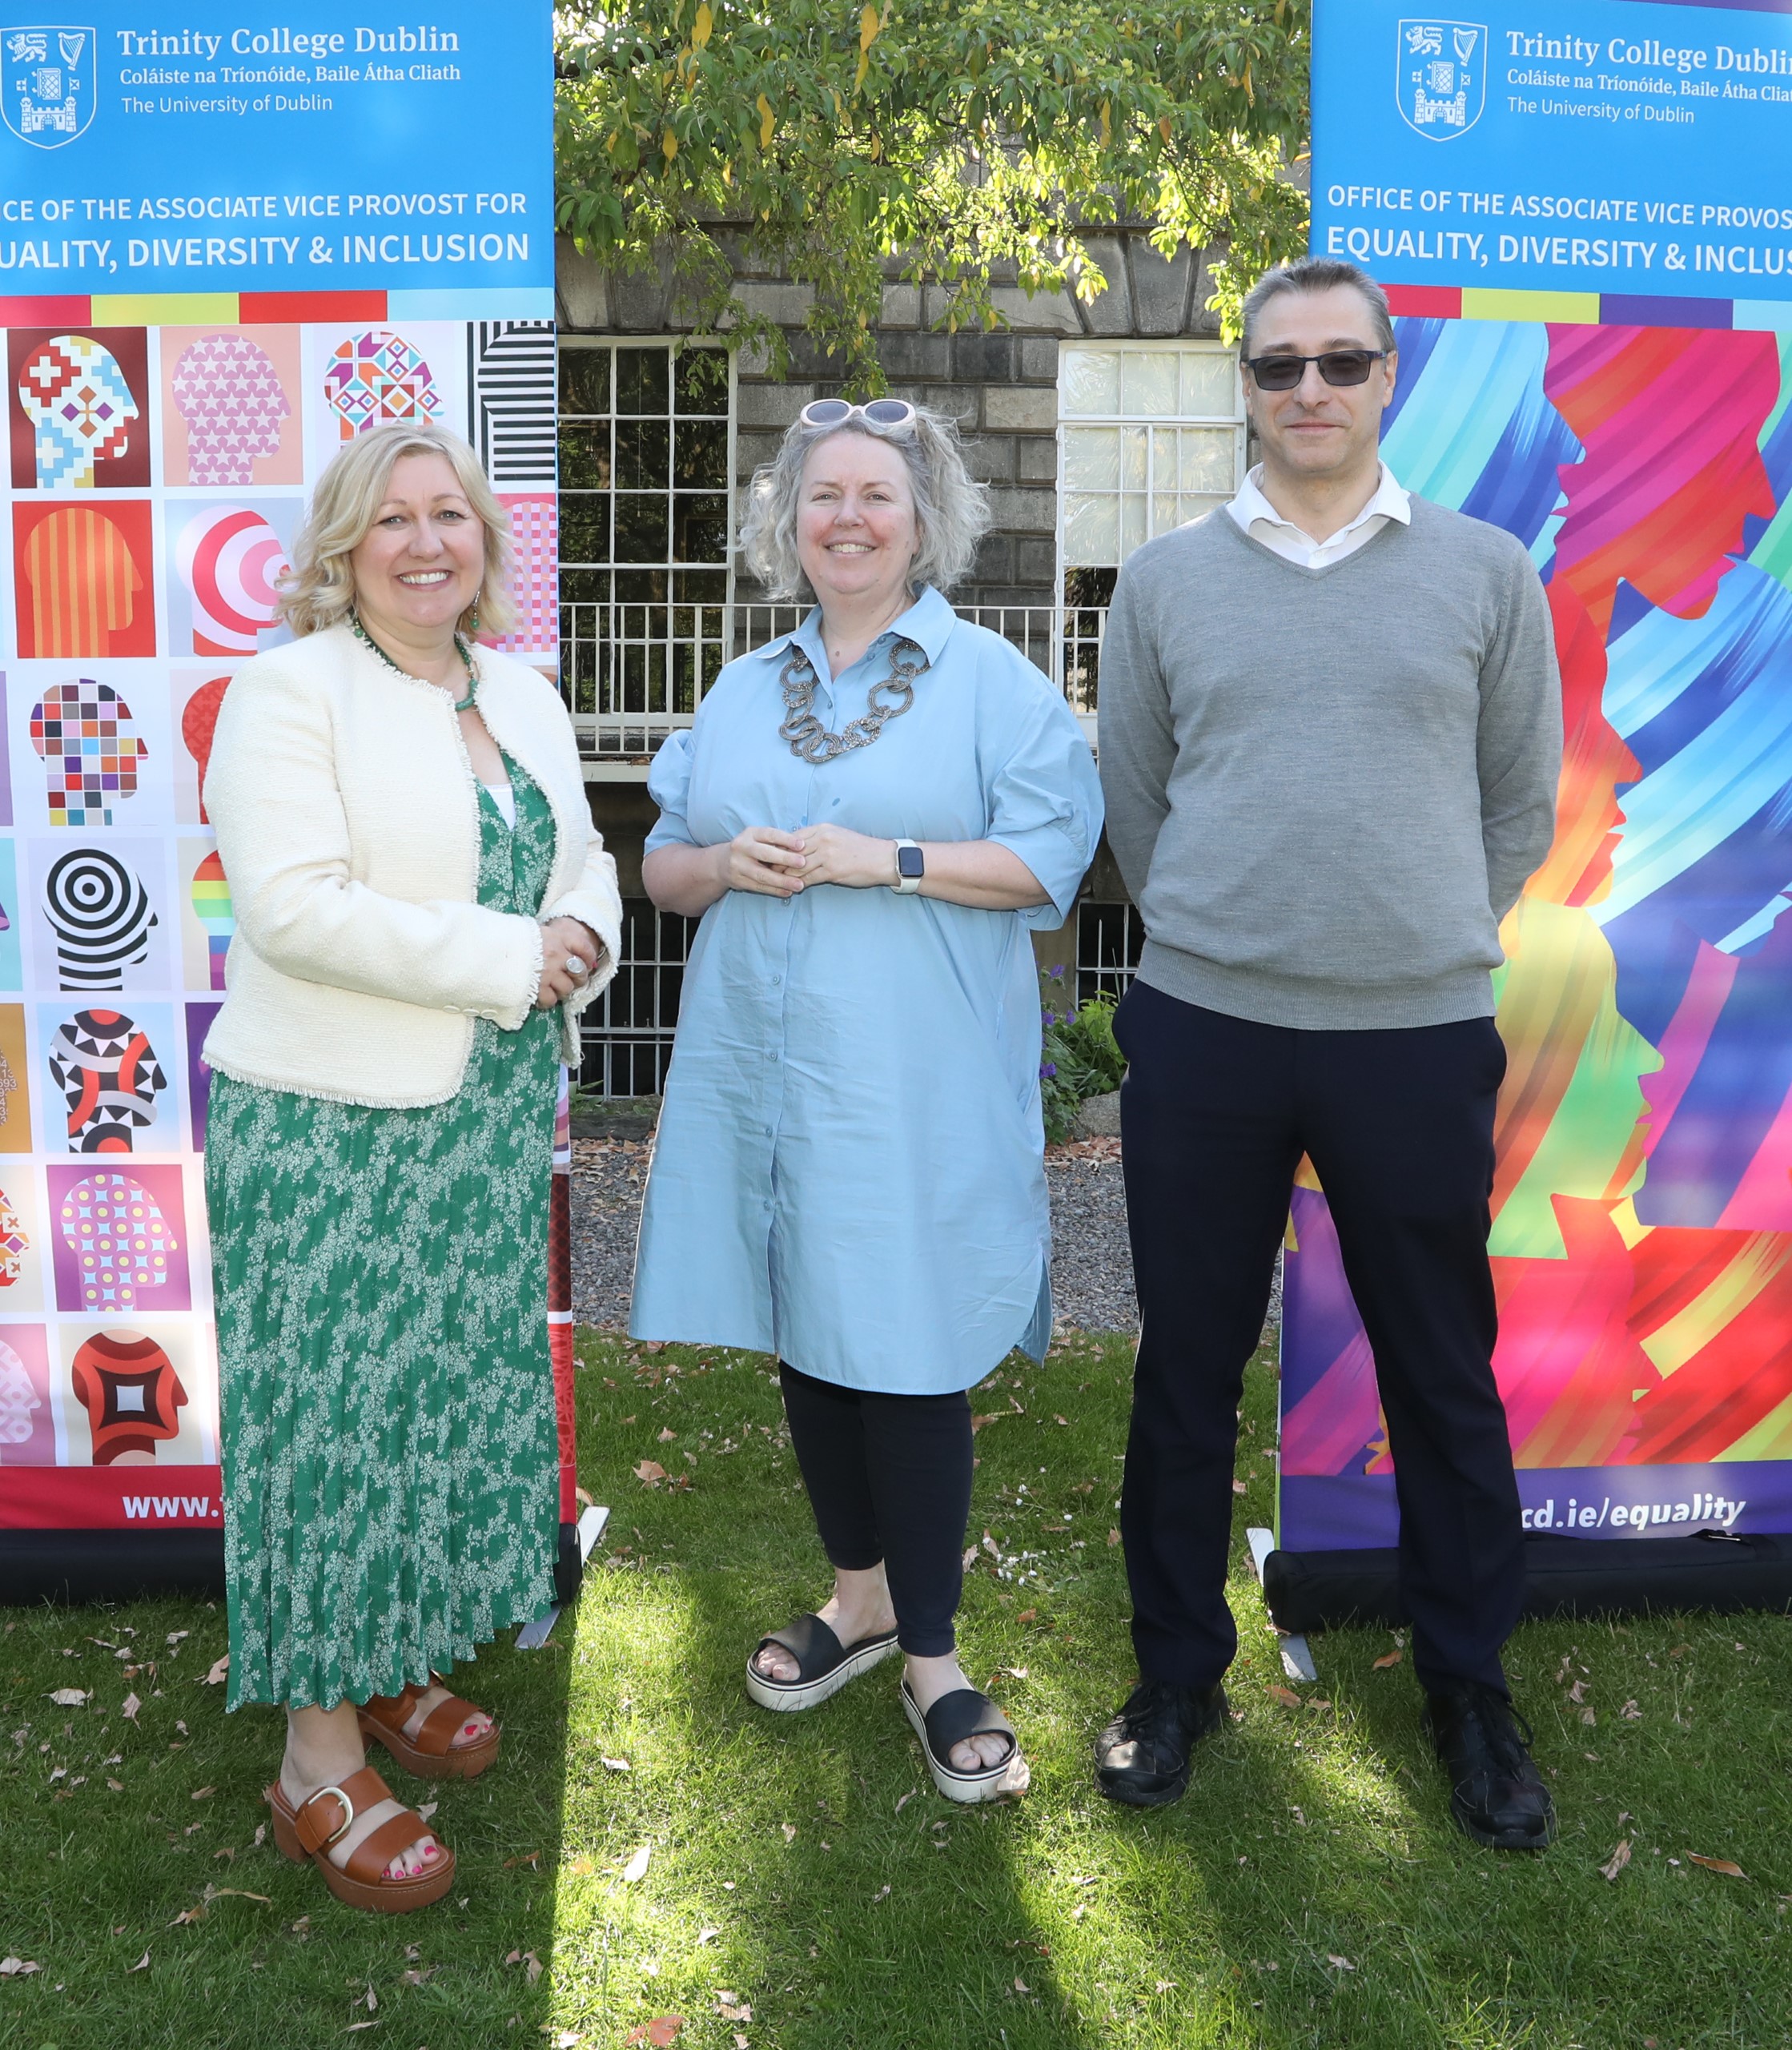 L-R Prof Lorraine Leeson, Associate Vice Provost for Equality, Diversity & Inclusion, Dr Linda Doyle, TCD Provost and Prof Graeme Watson, Head of School of Chemistry and Chair of the School's EDI committee